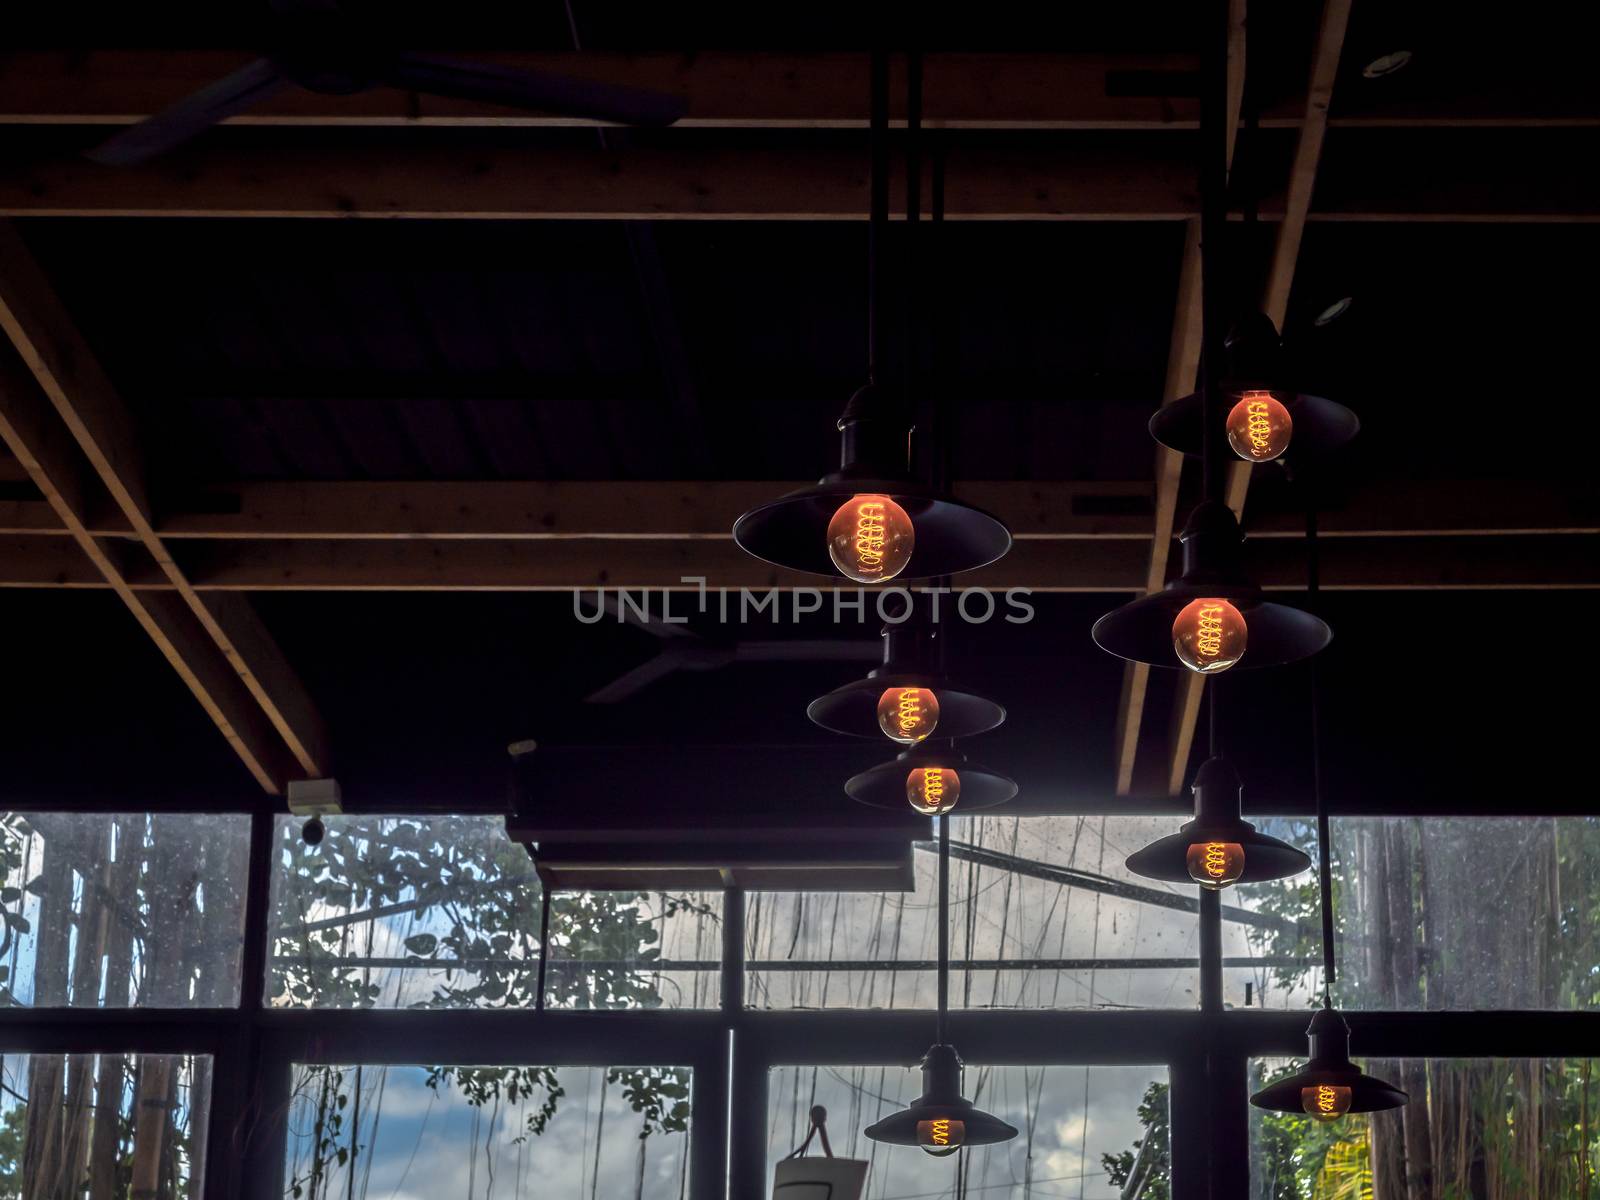 Lighting decoration, vintage ceiling lights hanging from ceiling in cafe, industrial style light bulbs interior design.